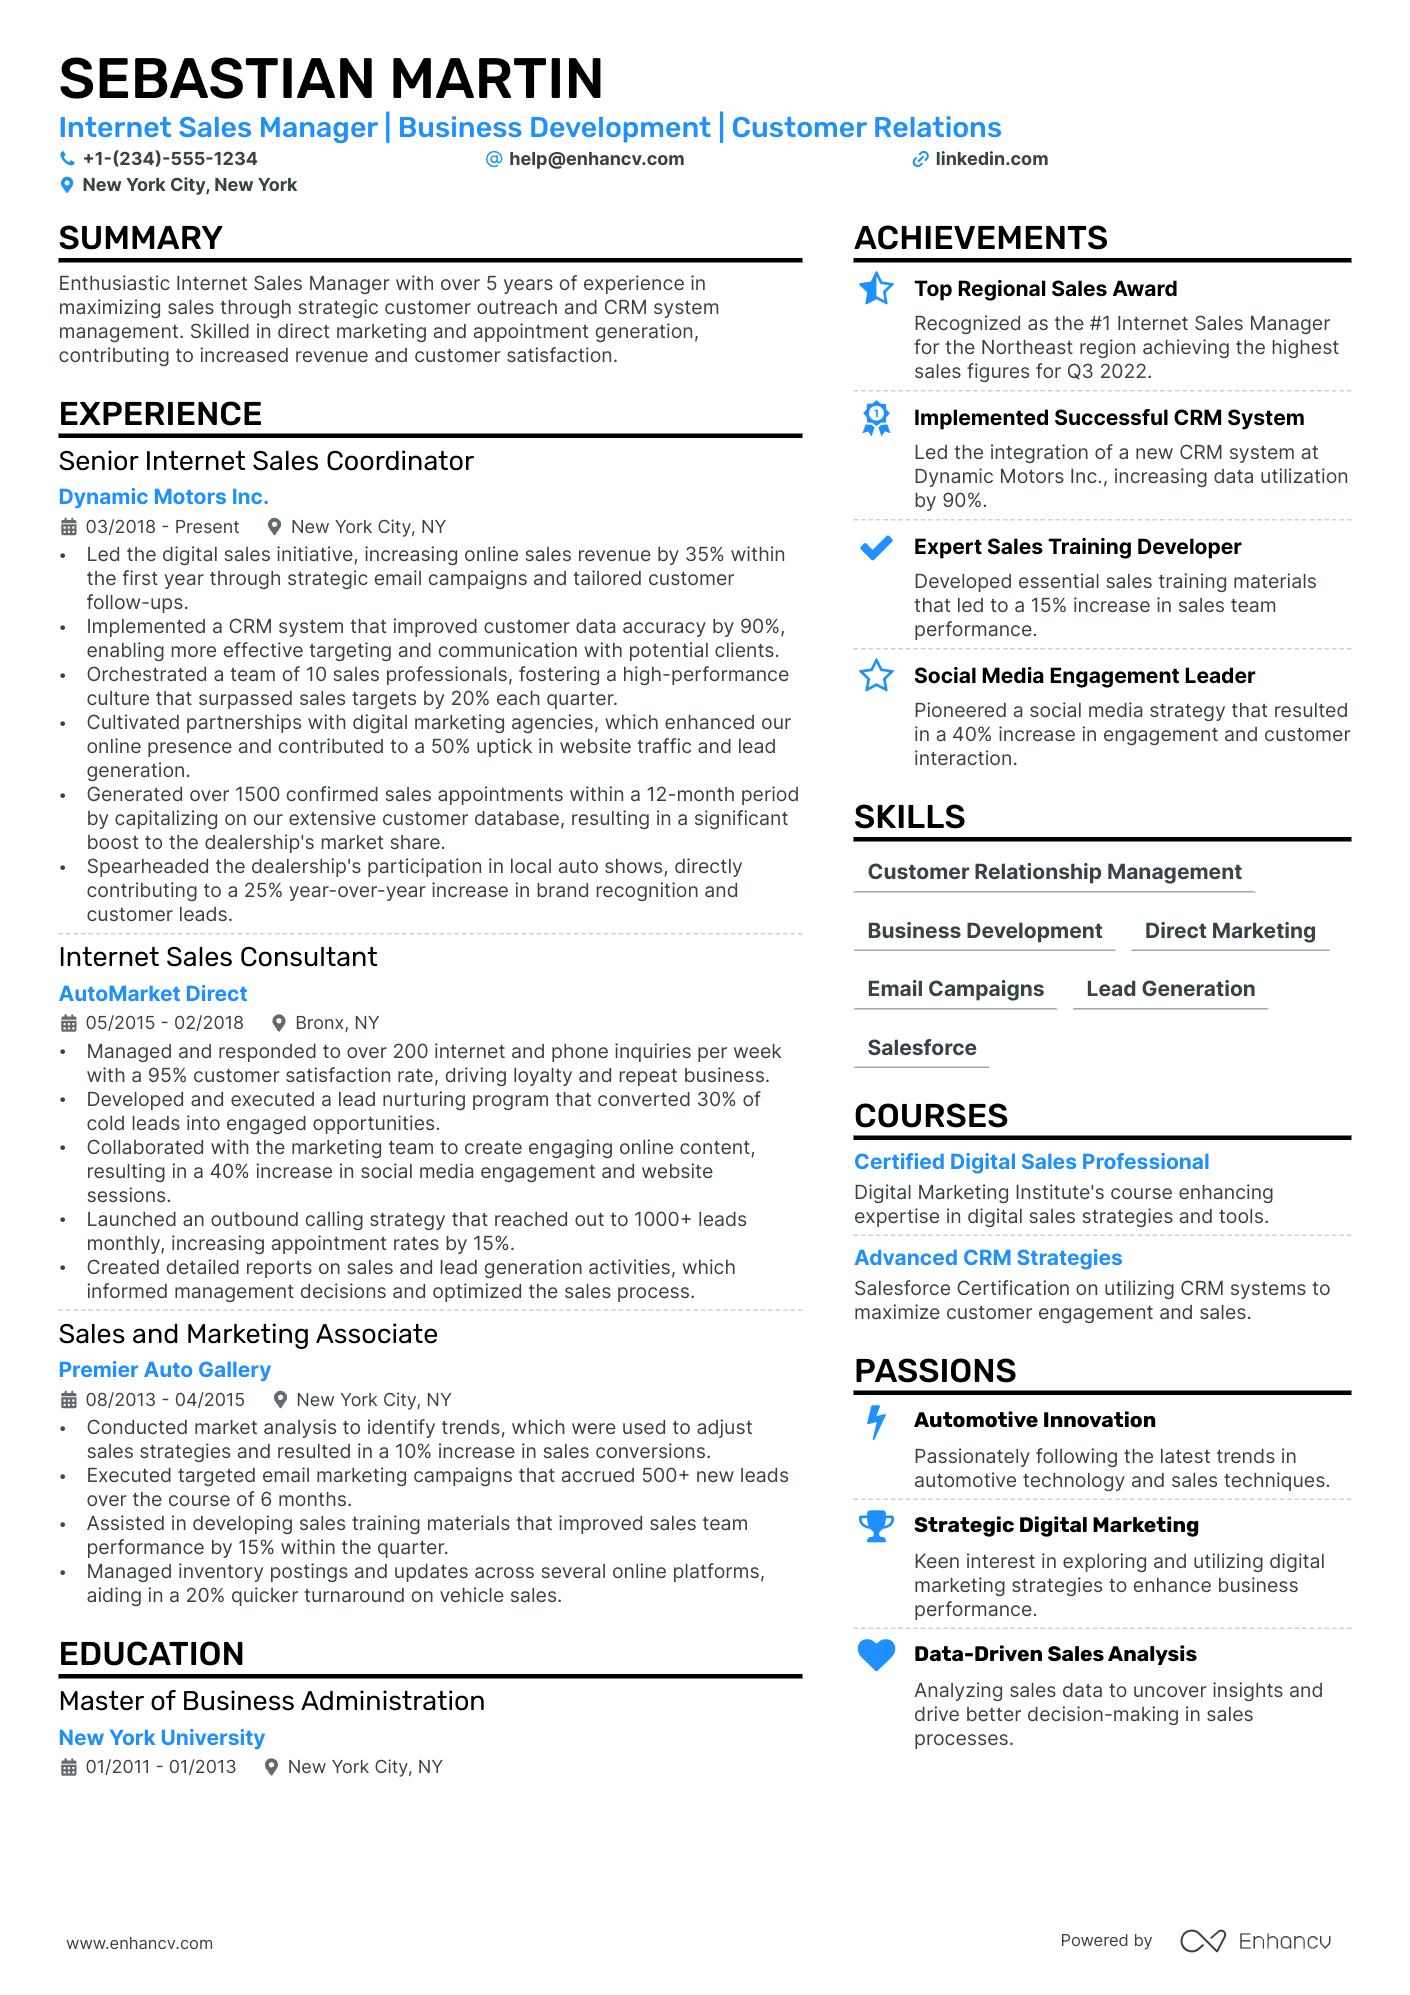 resume template for sales manager